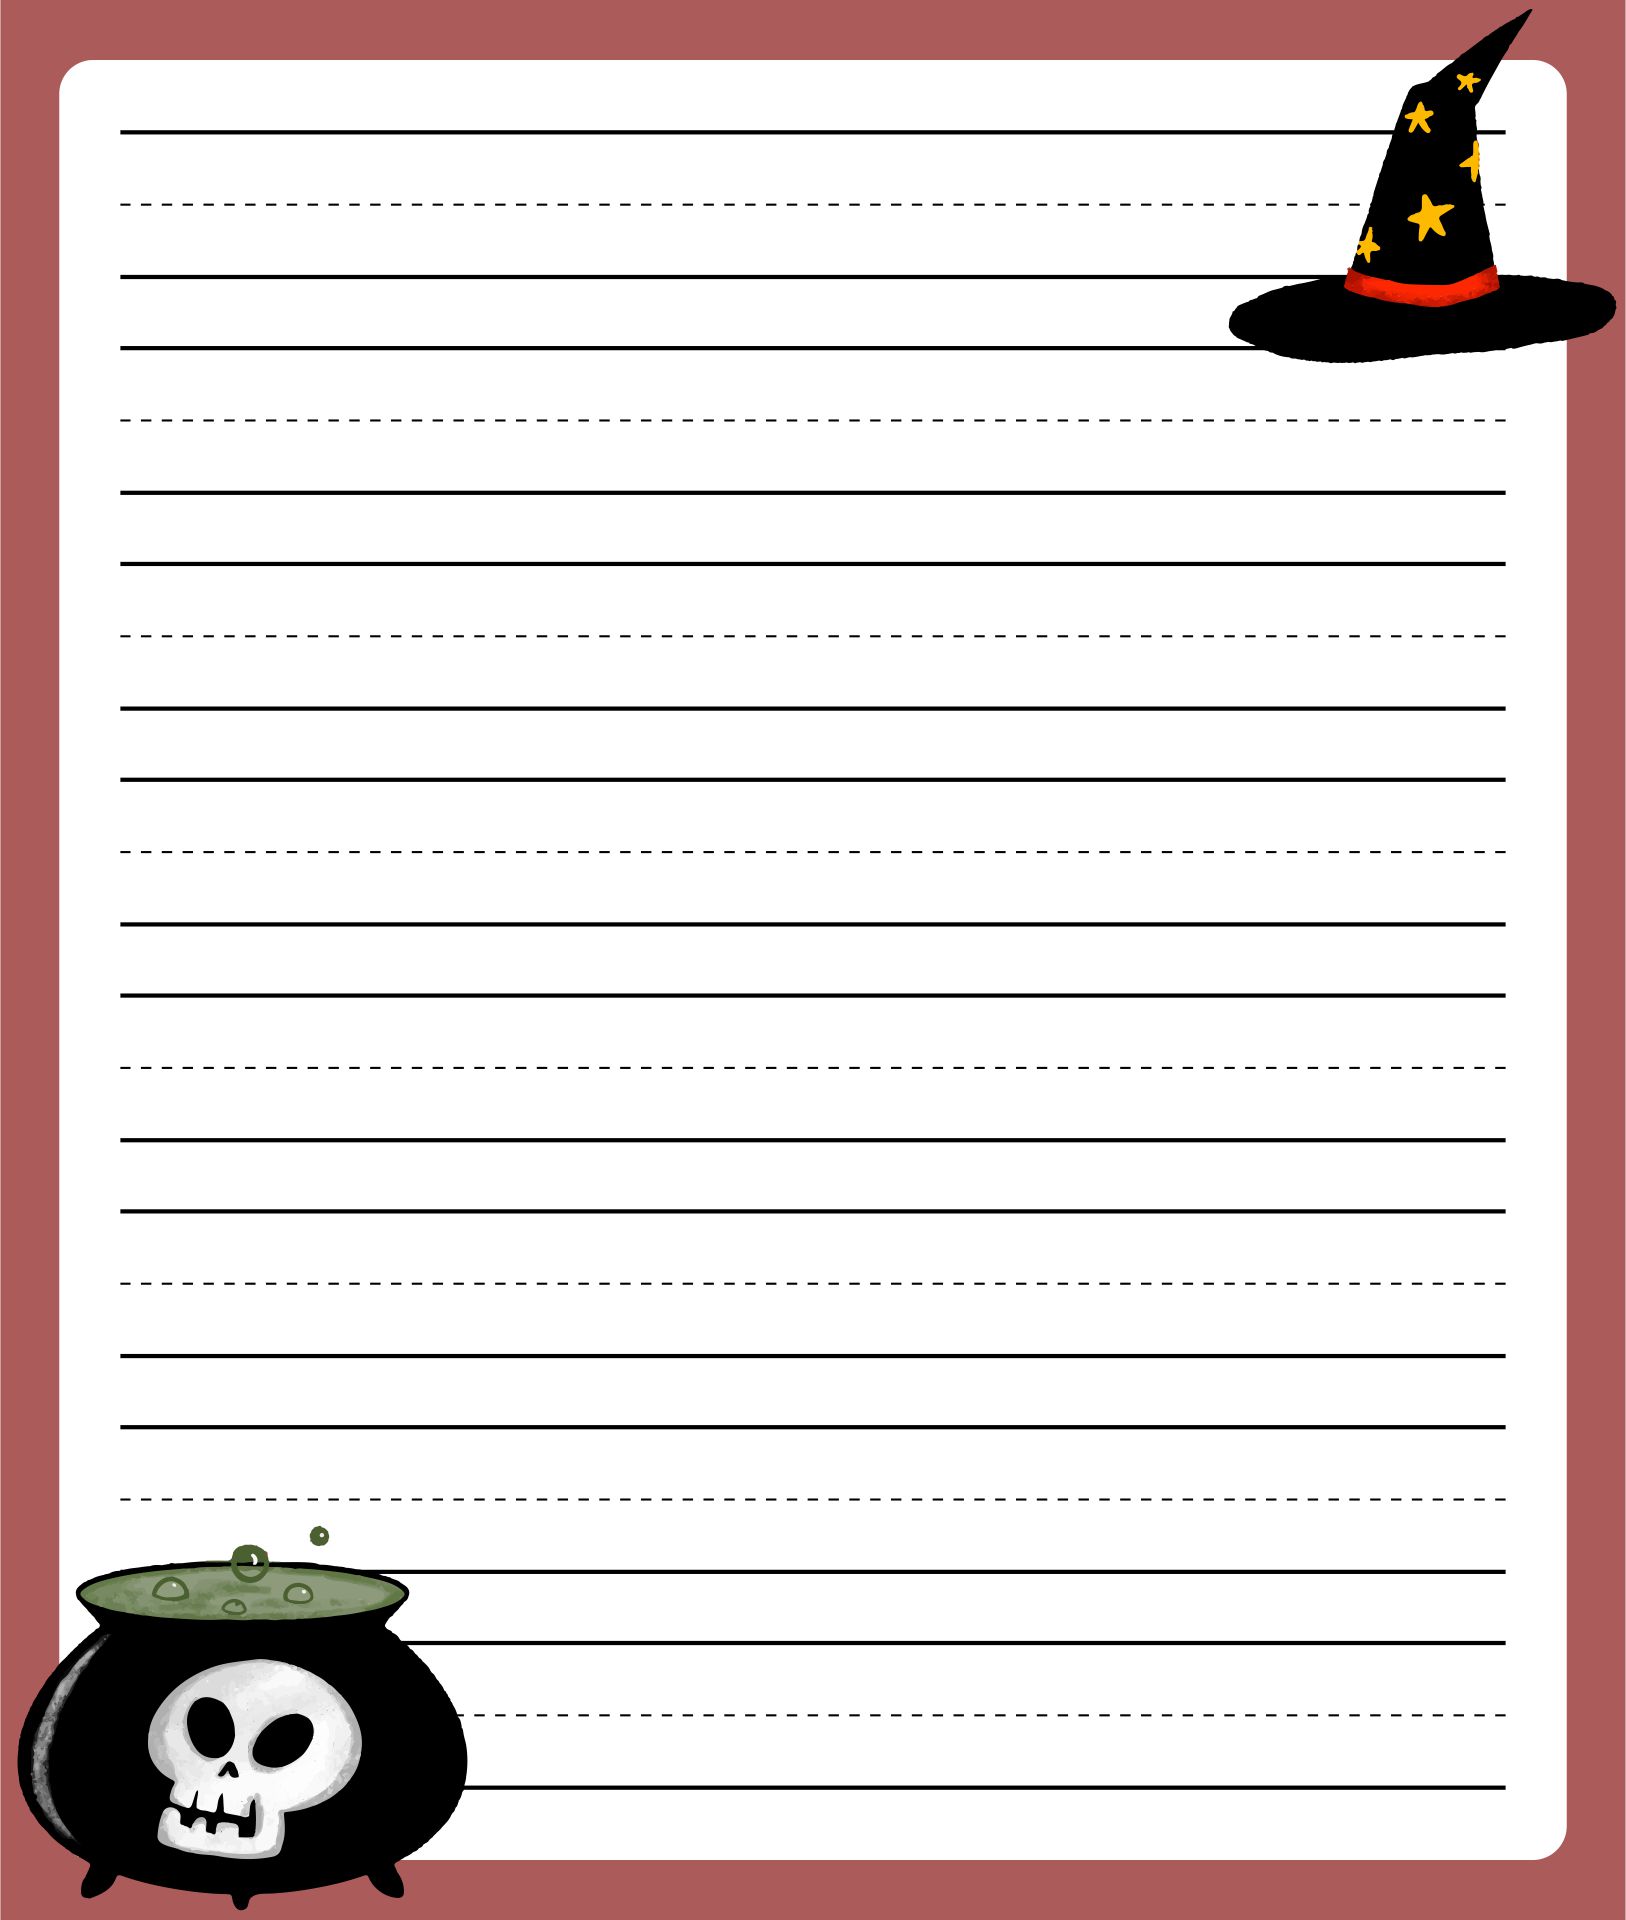 7 Best Images Of Halloween Writing Paper Template Printable Free Halloween Writing Paper For 